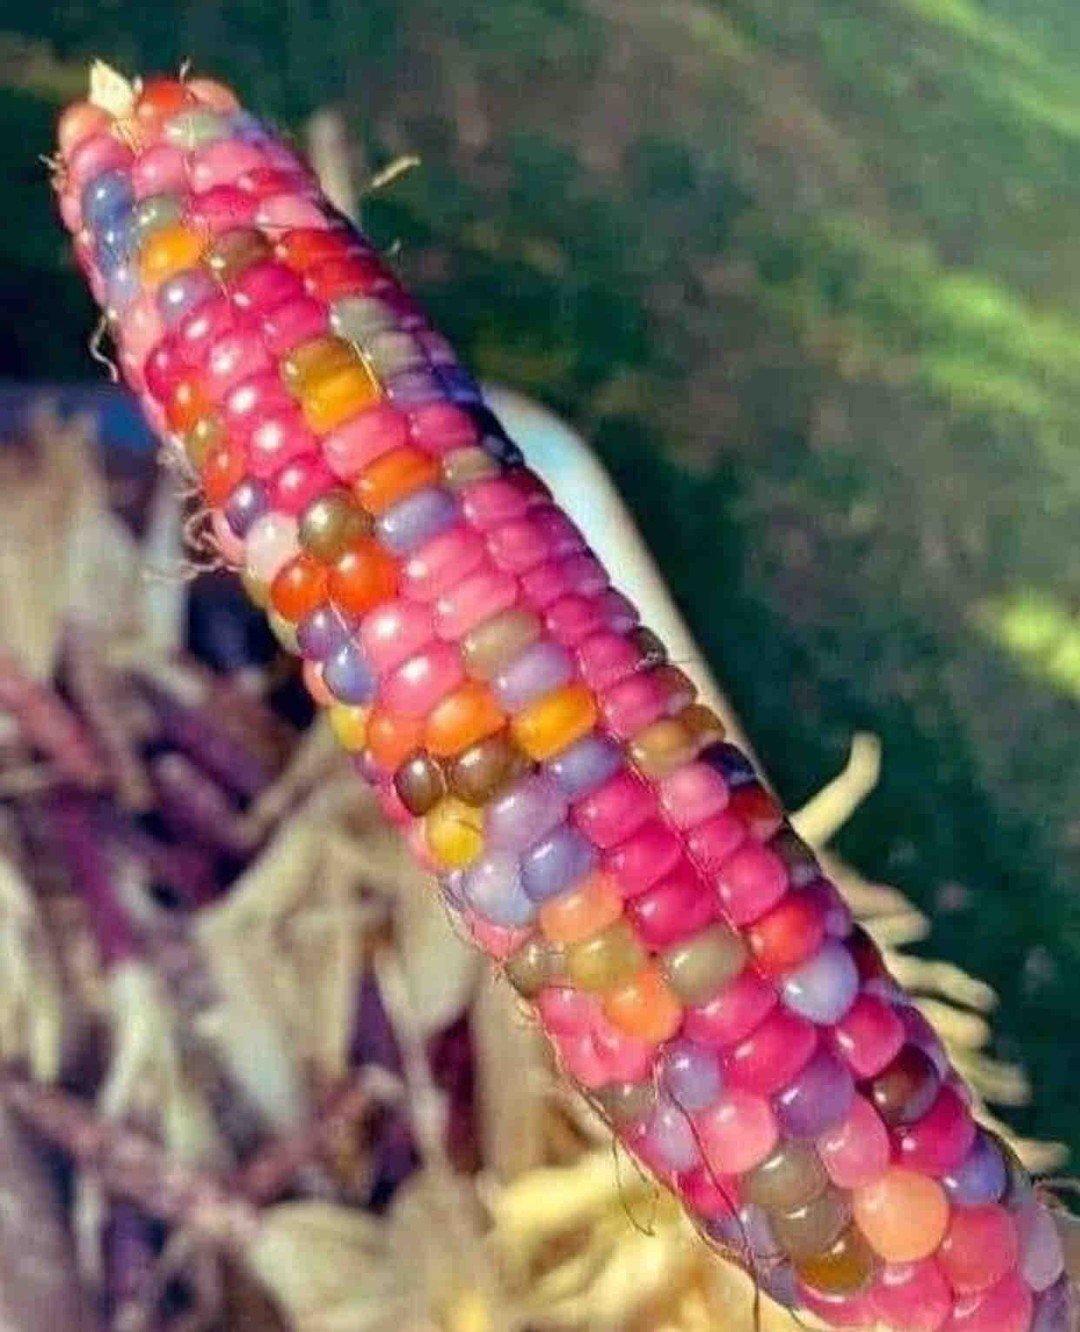 Pre-colonization Glass Gem Corn, Indigenous to North America, regrown by a #Cherokee farmer in #Oklahoma. This particular corn is a mix of ancient #Pawnee, #Osage and Cherokee varieties.
#epic #sharingiscaring #truth #choctaw #IndigenousIngredients  